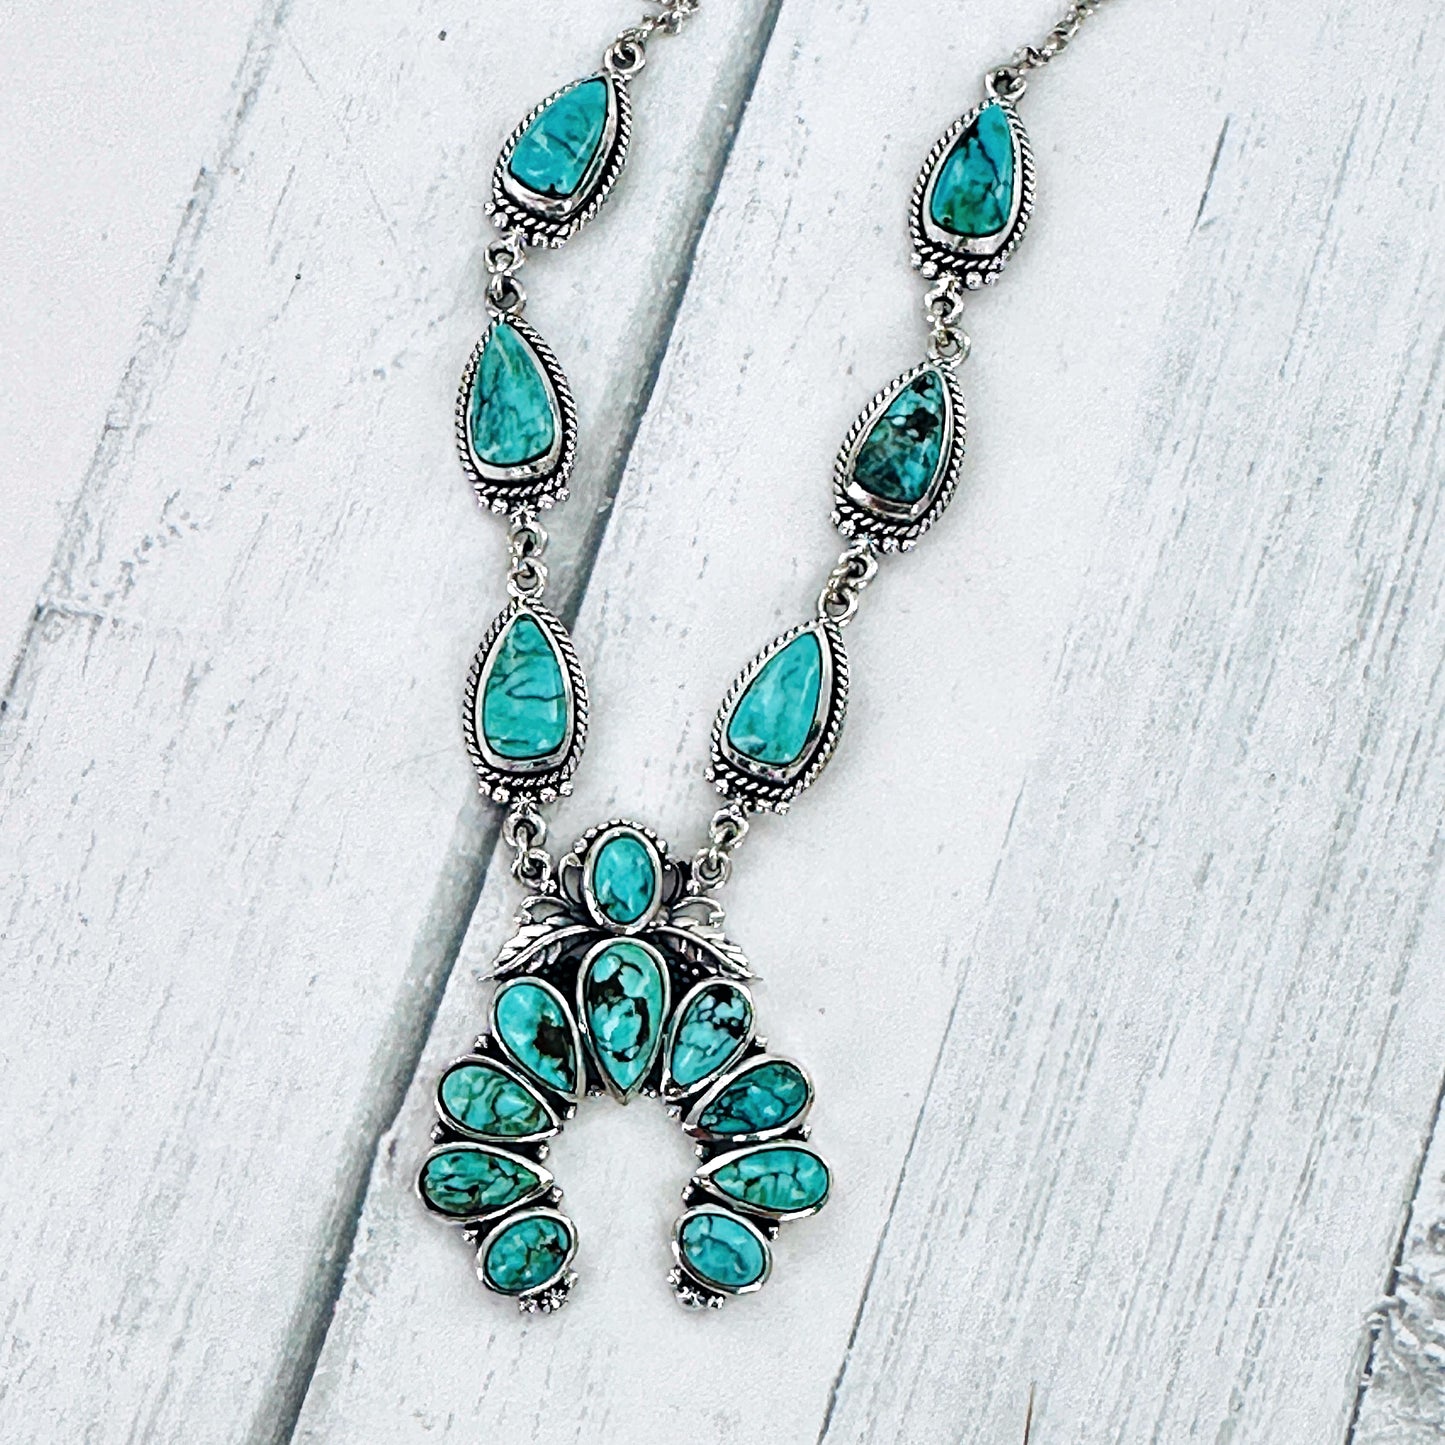 Blue Moon Turquoise Squash Blossom Necklace